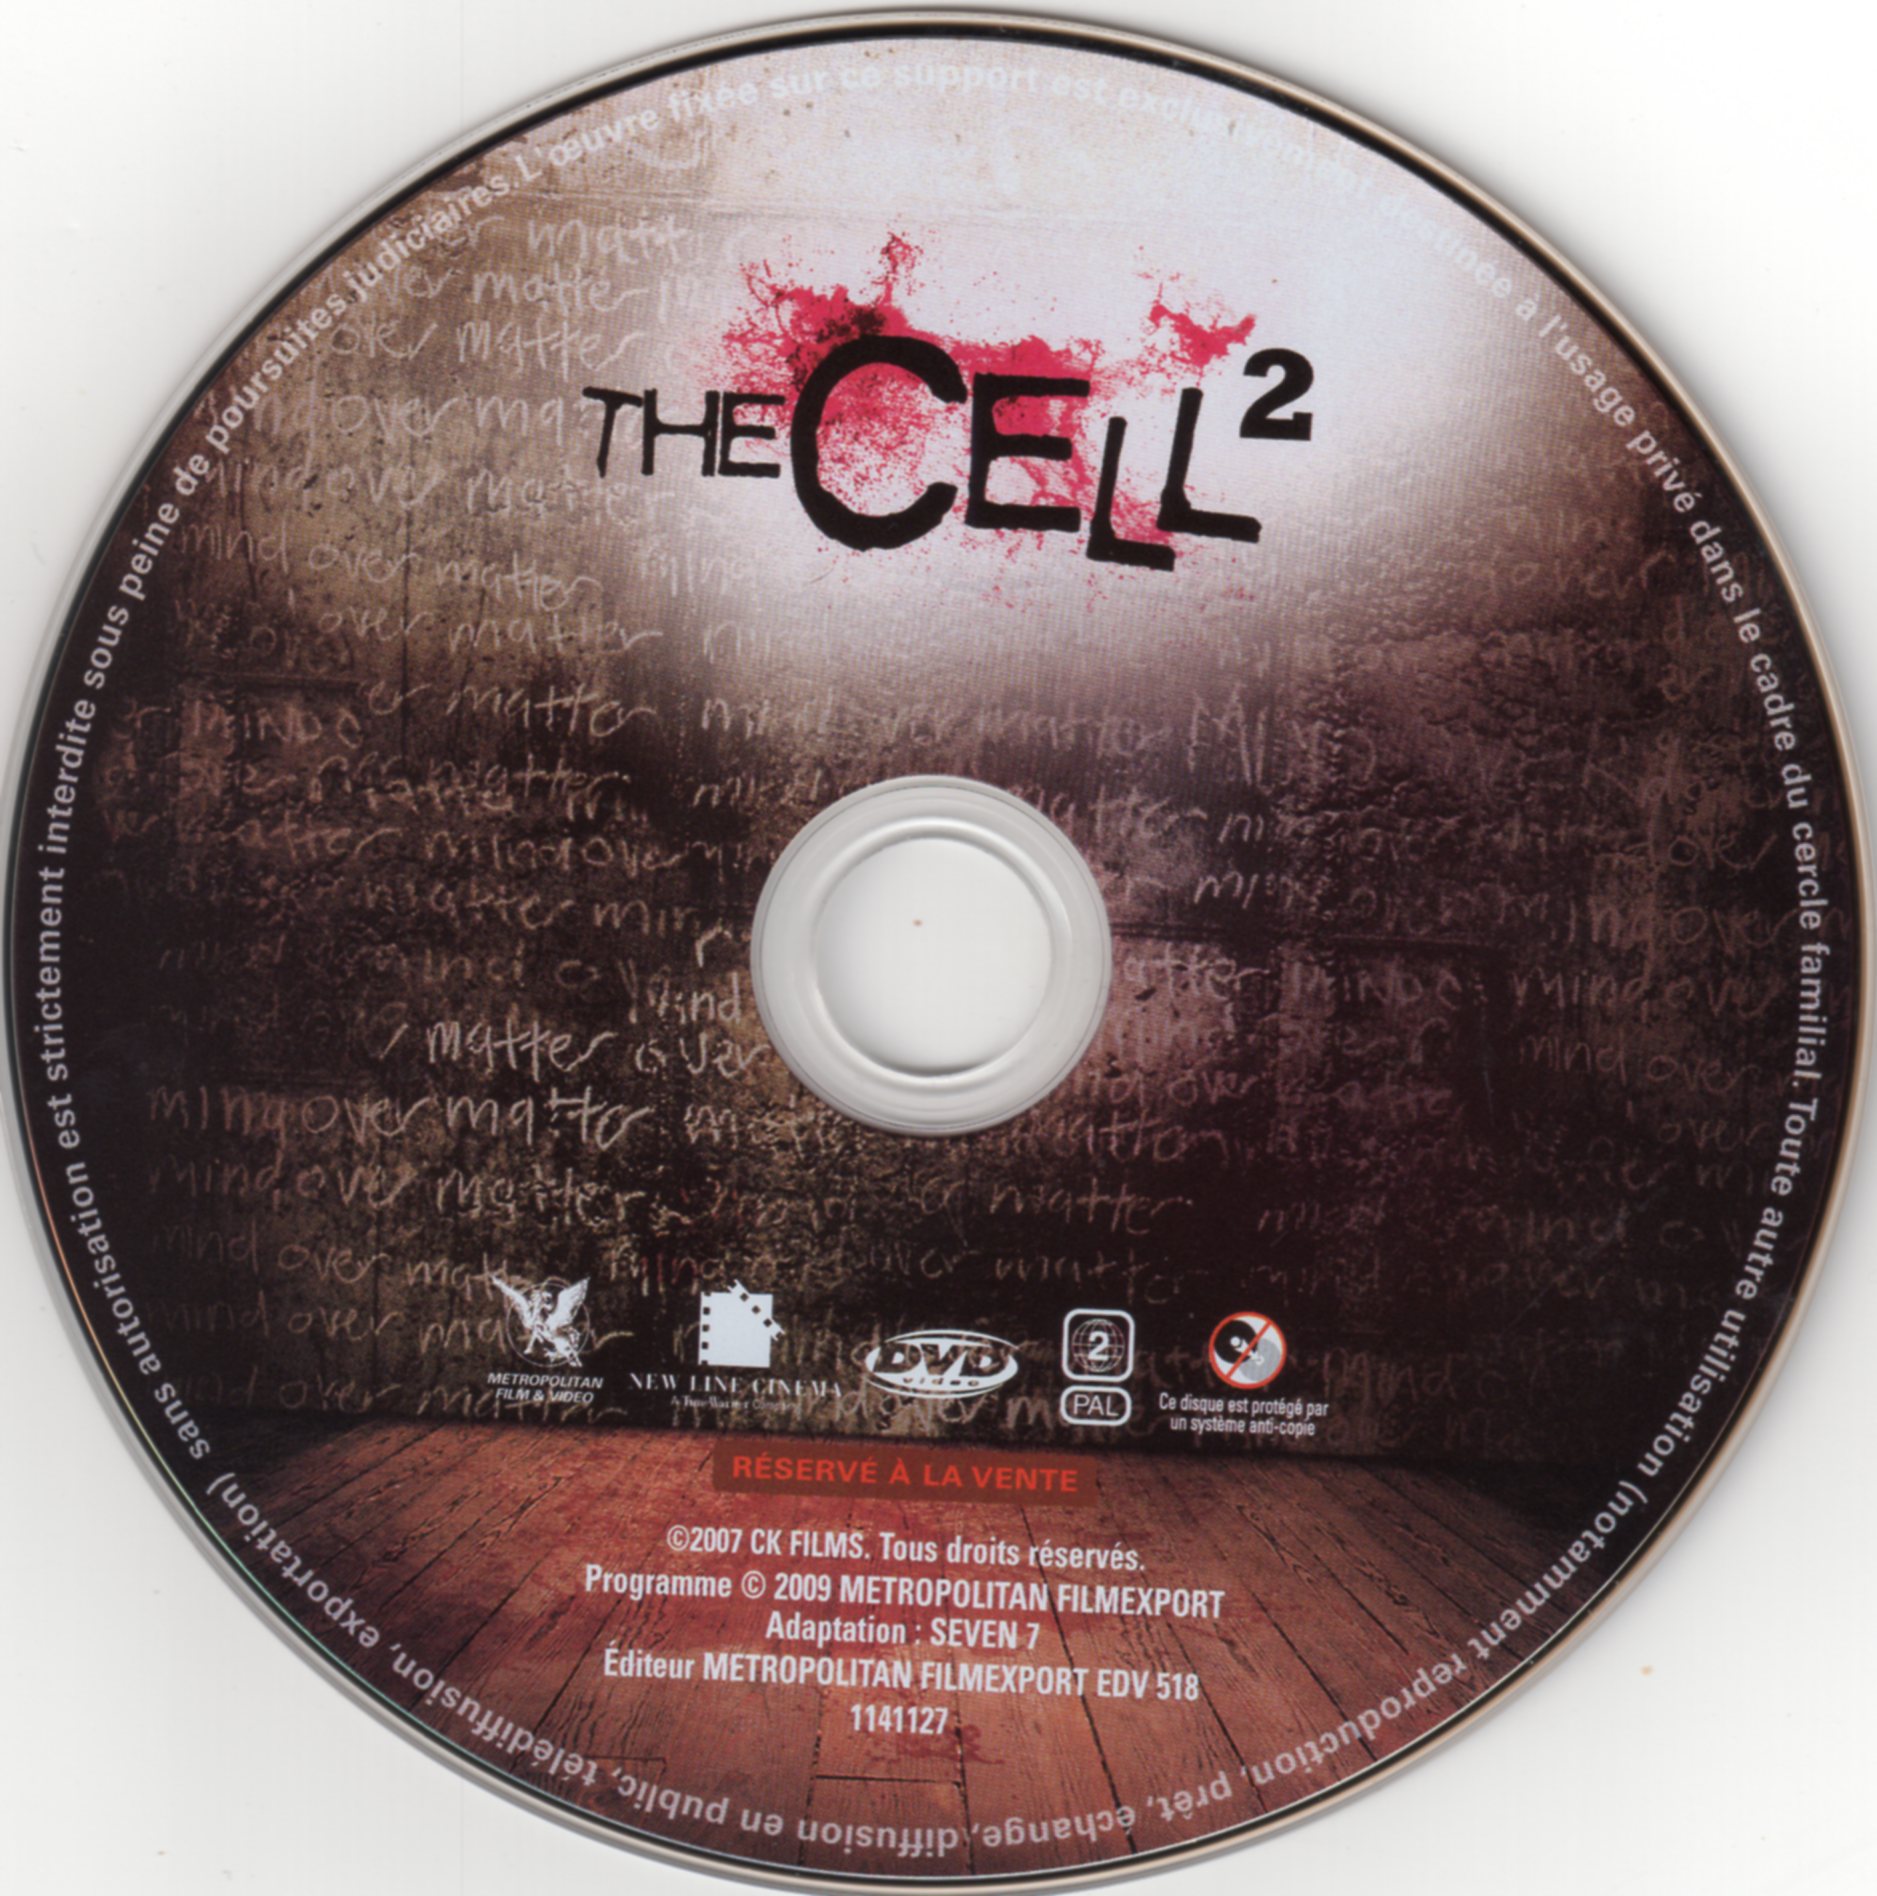 The cell 2